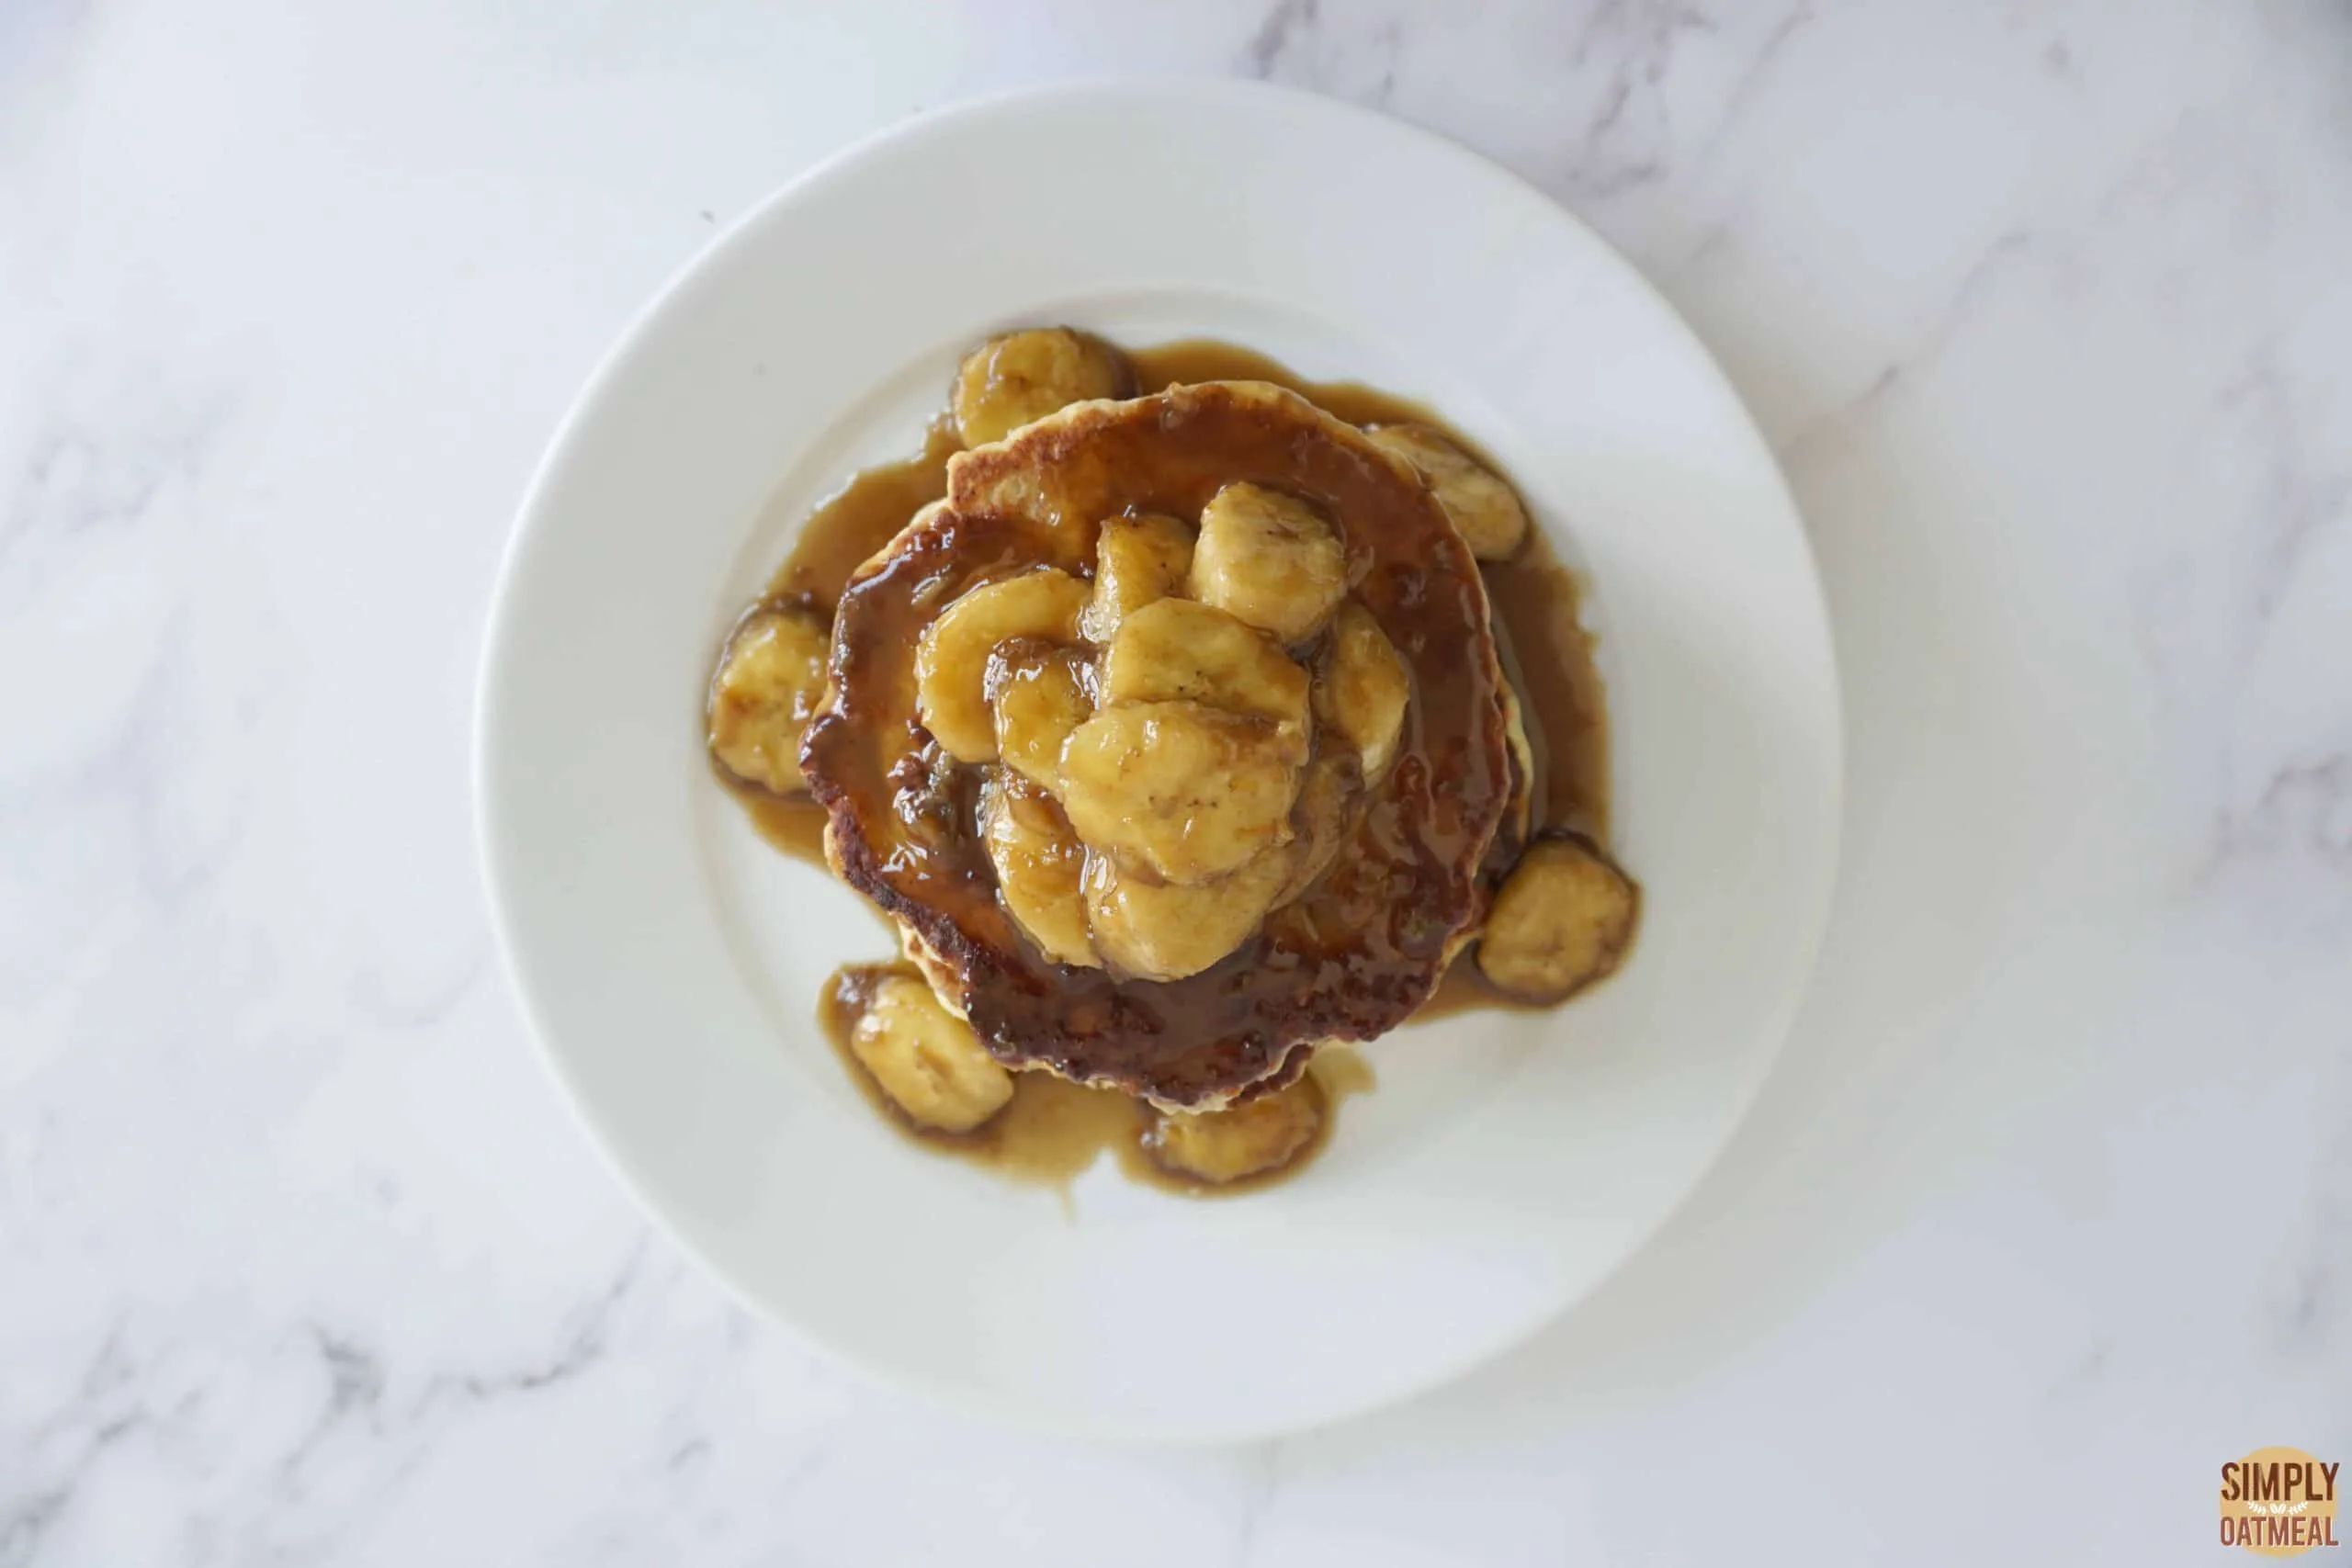 Oatmeal pancakes topped with banana butterscotch sauce